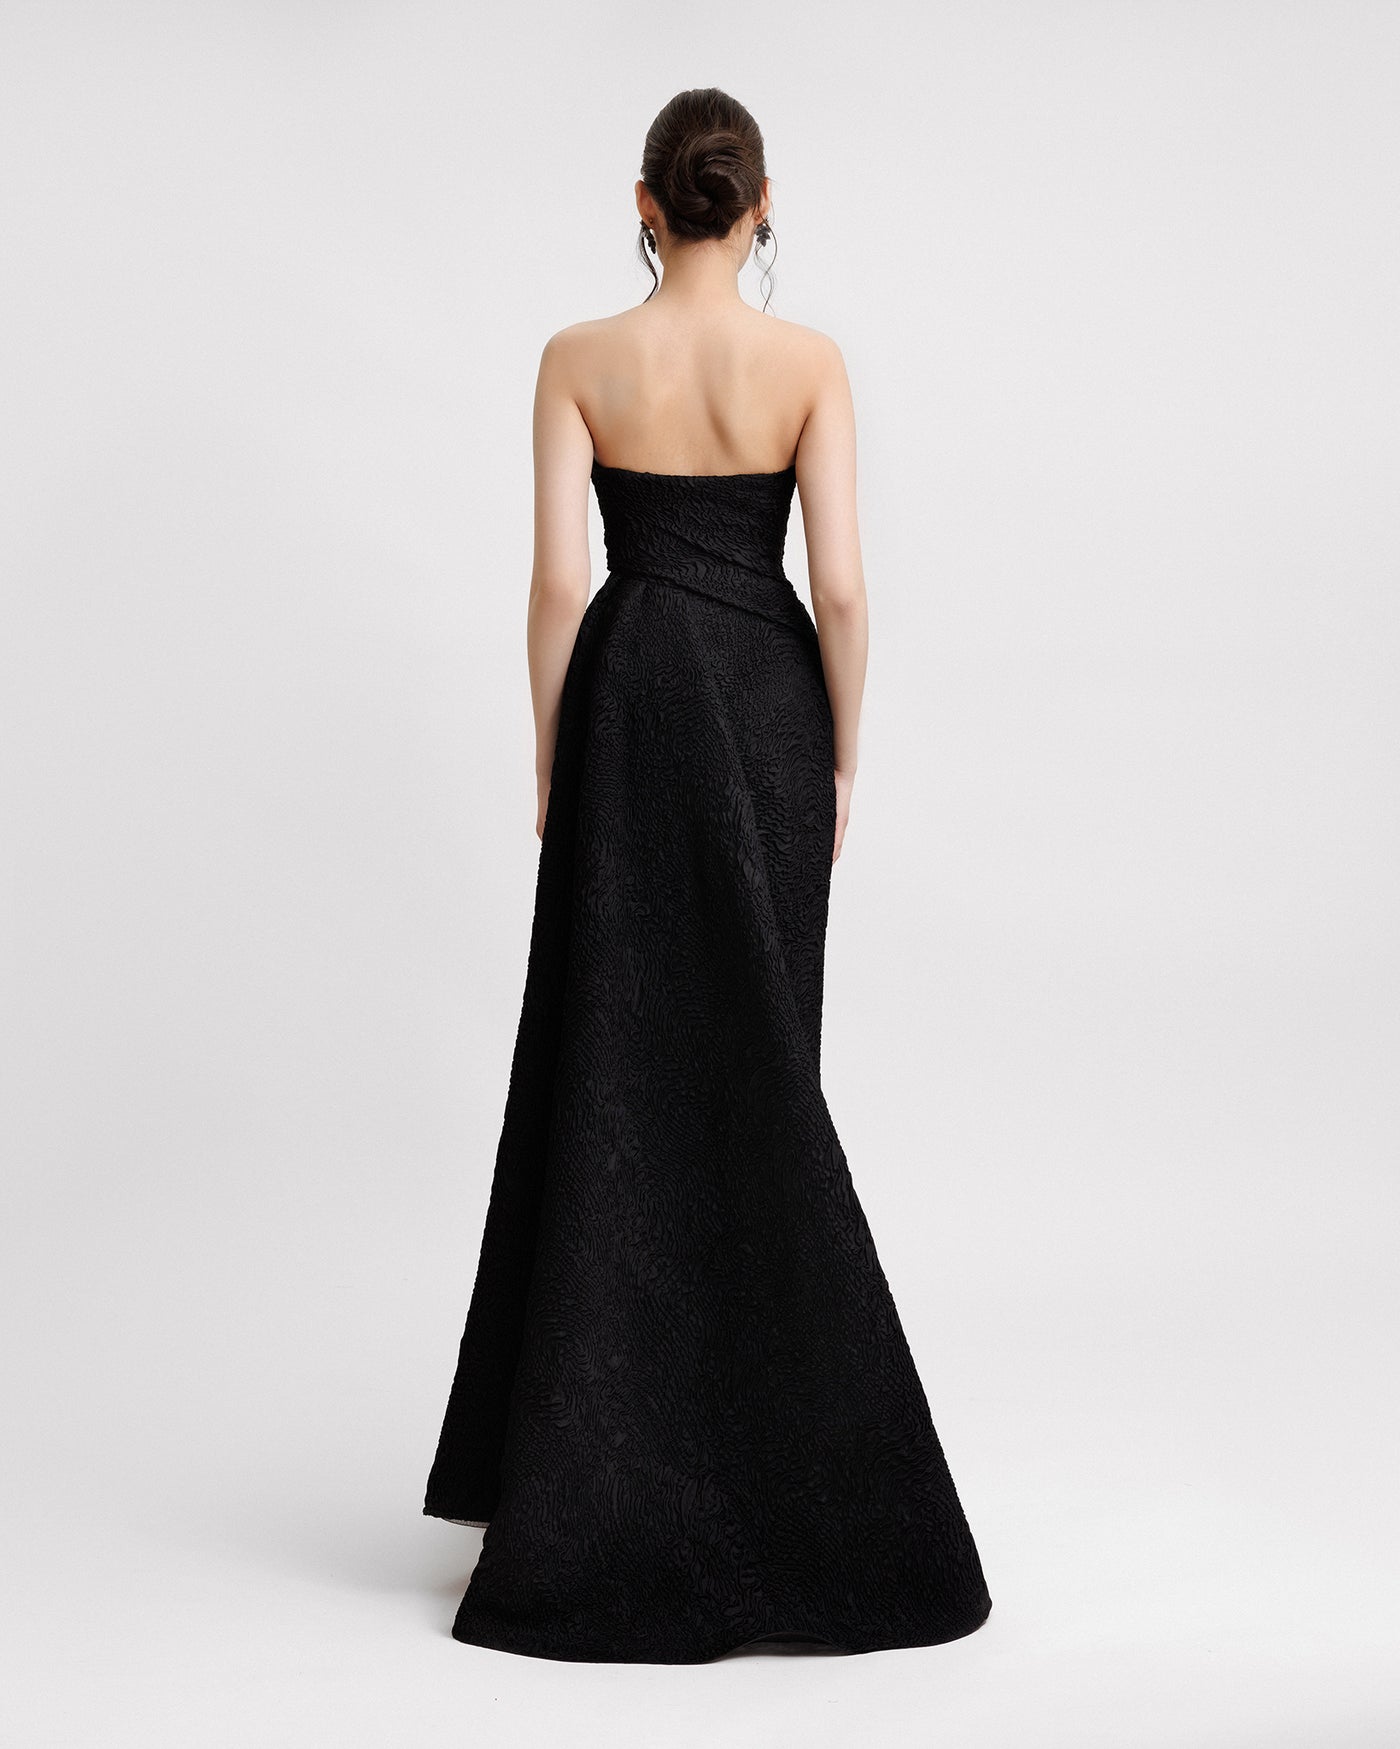 Strapless Dress With a Draped Skirt